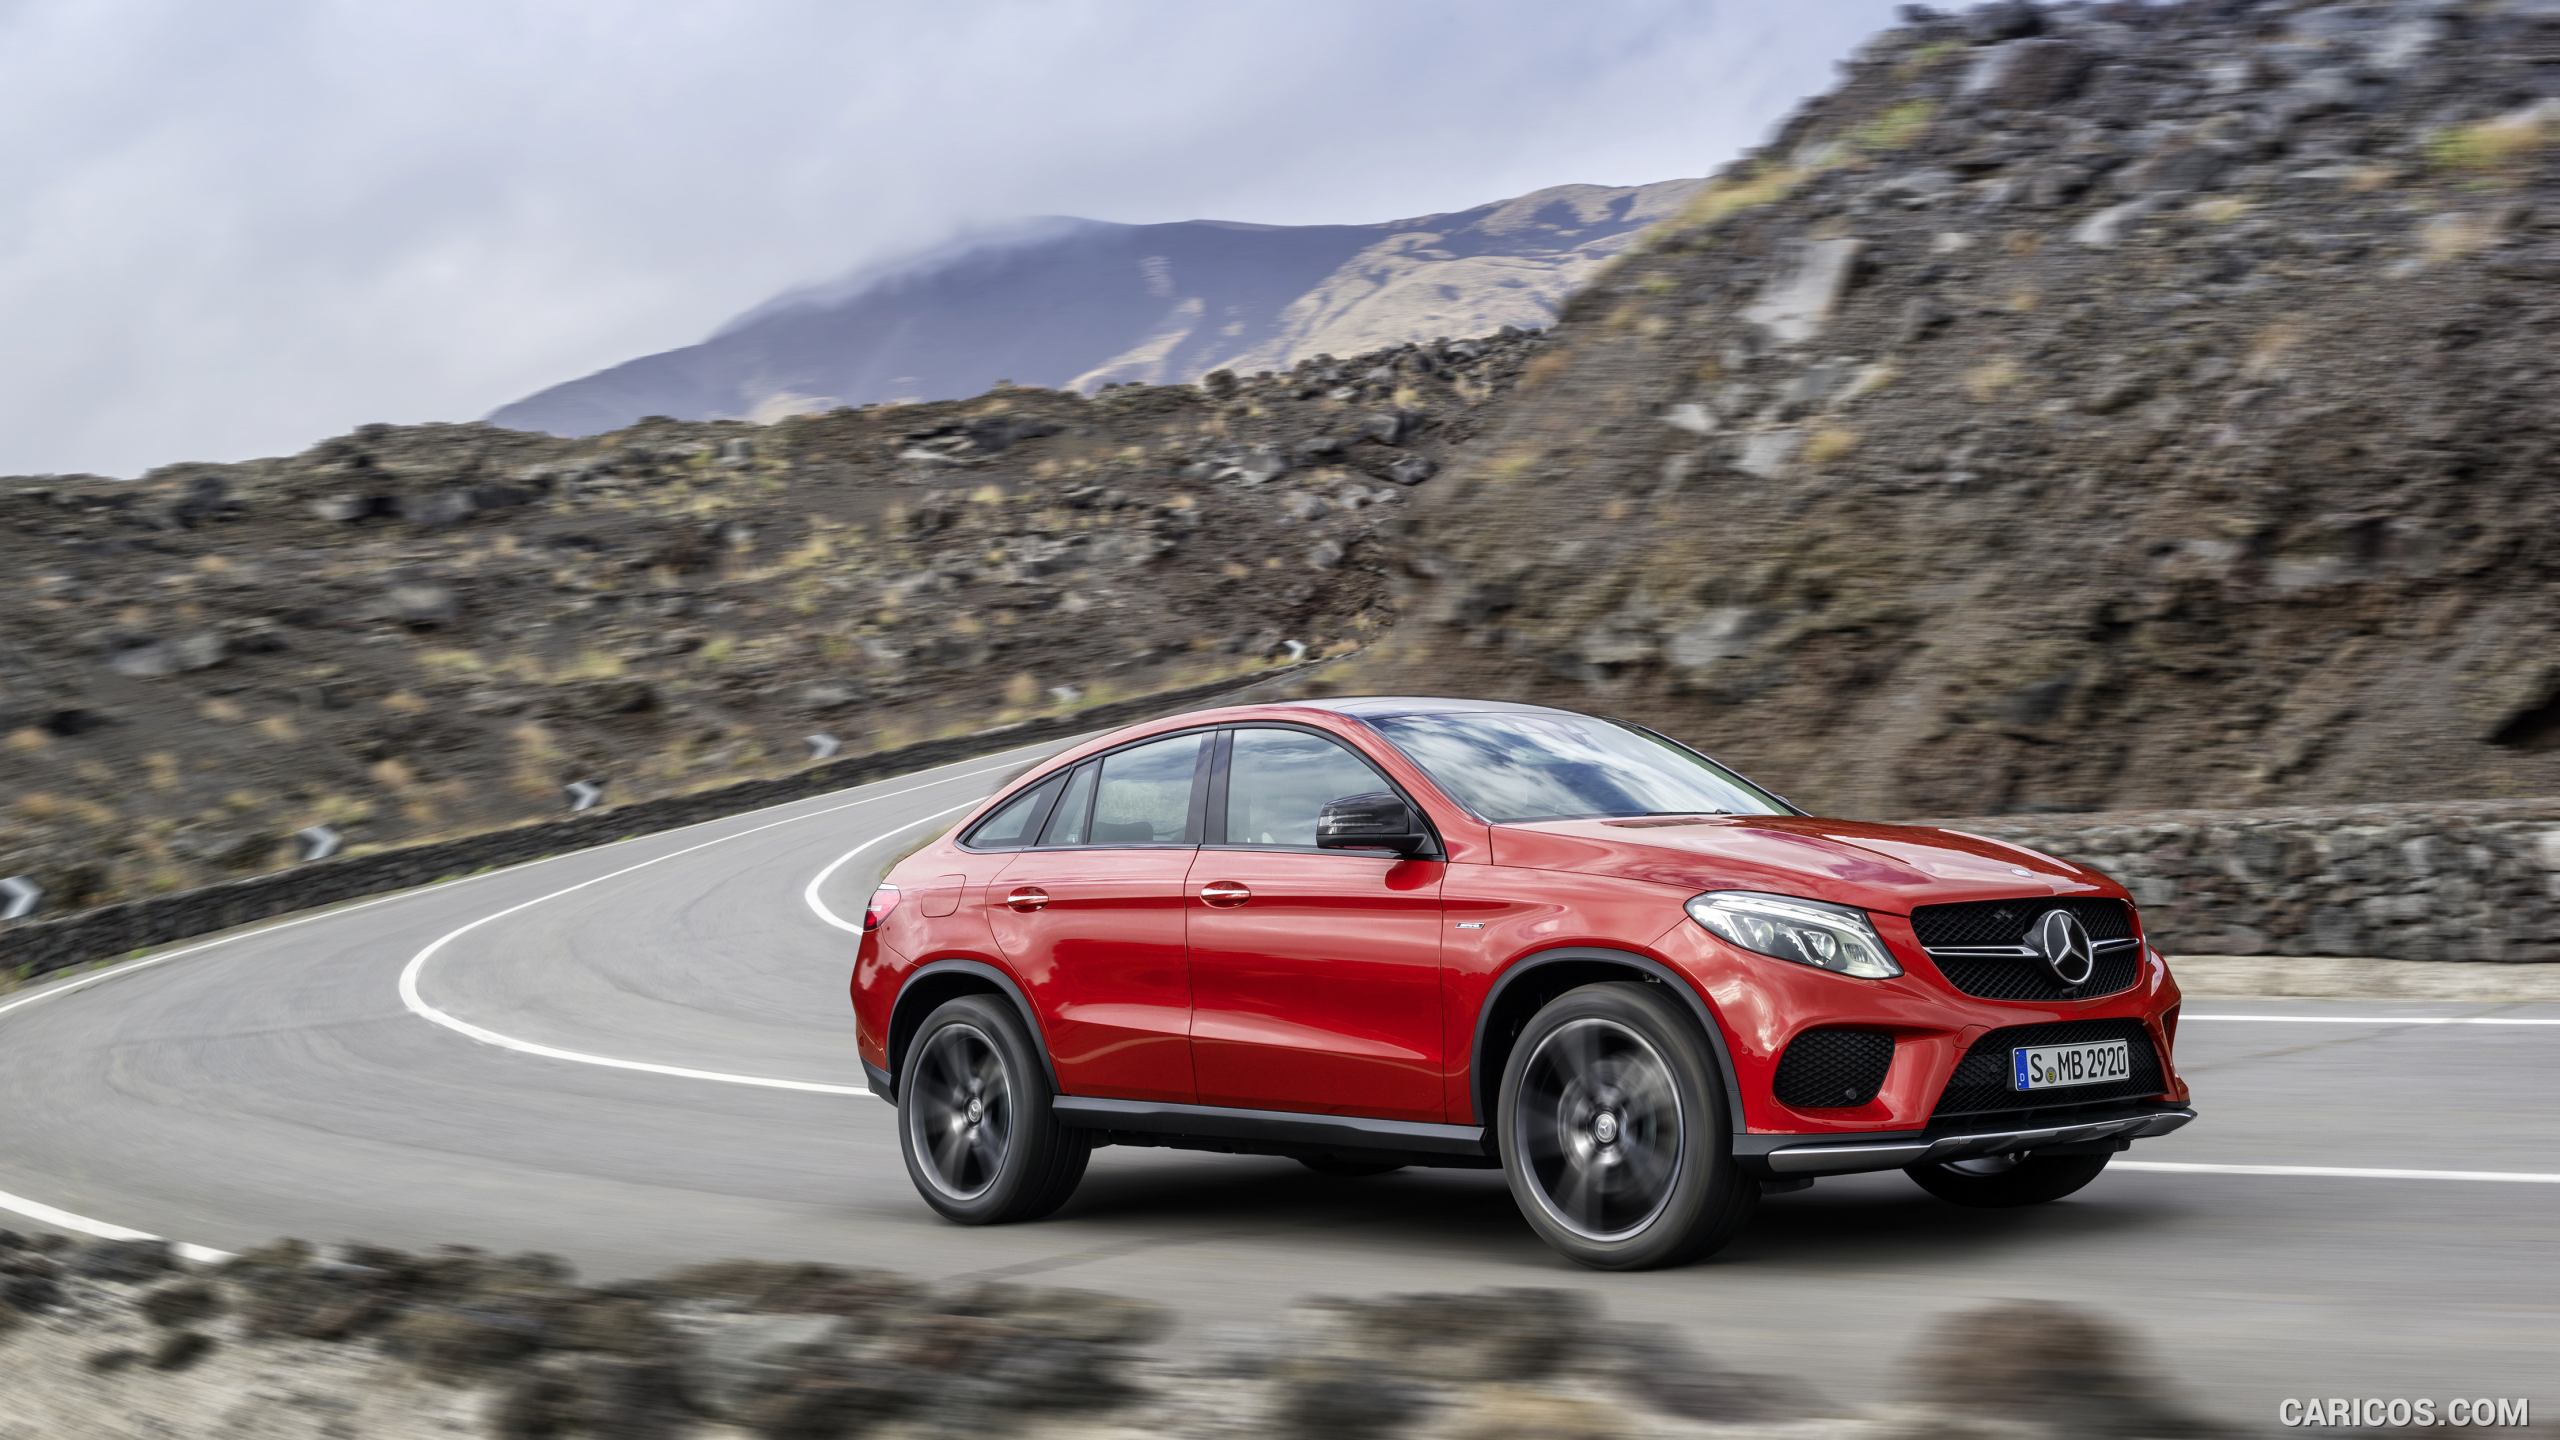 2016 Mercedes-Benz GLE 450 AMG Coupe 4MATIC (Designo Hyacinth Red Metallic) - Side, #16 of 115